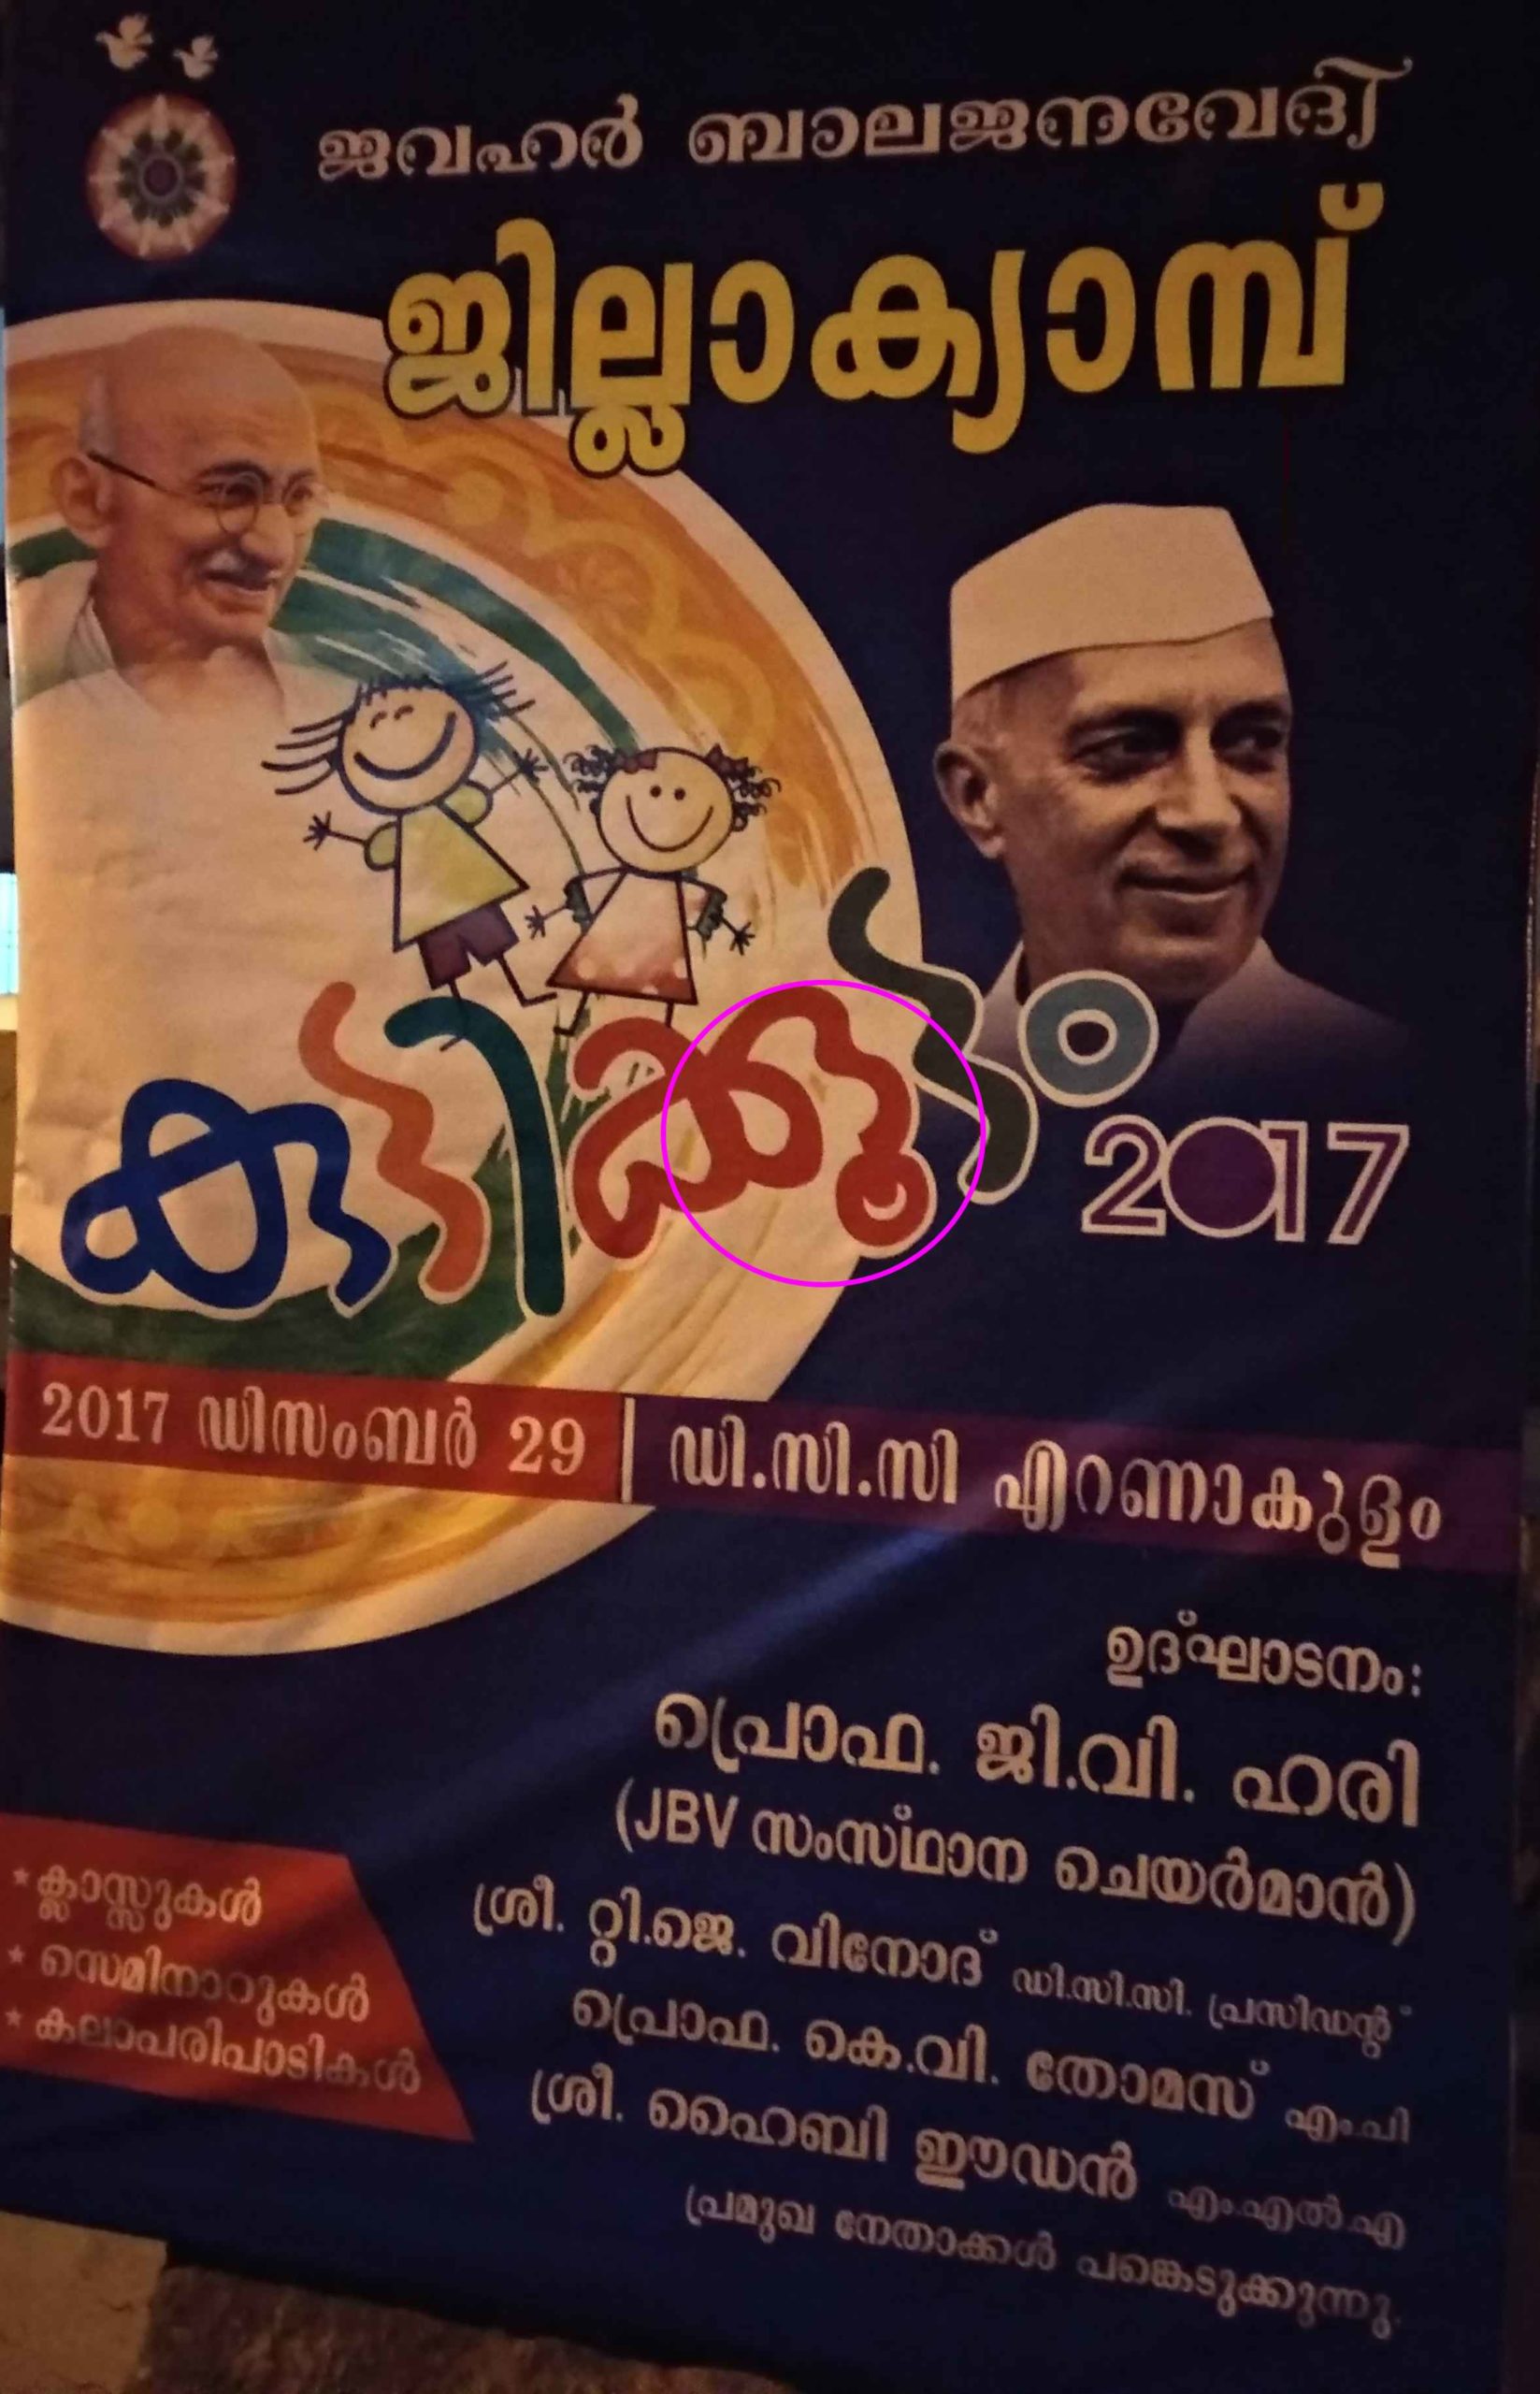 A poster in Malayalam showing the redundant usage of u-signs.